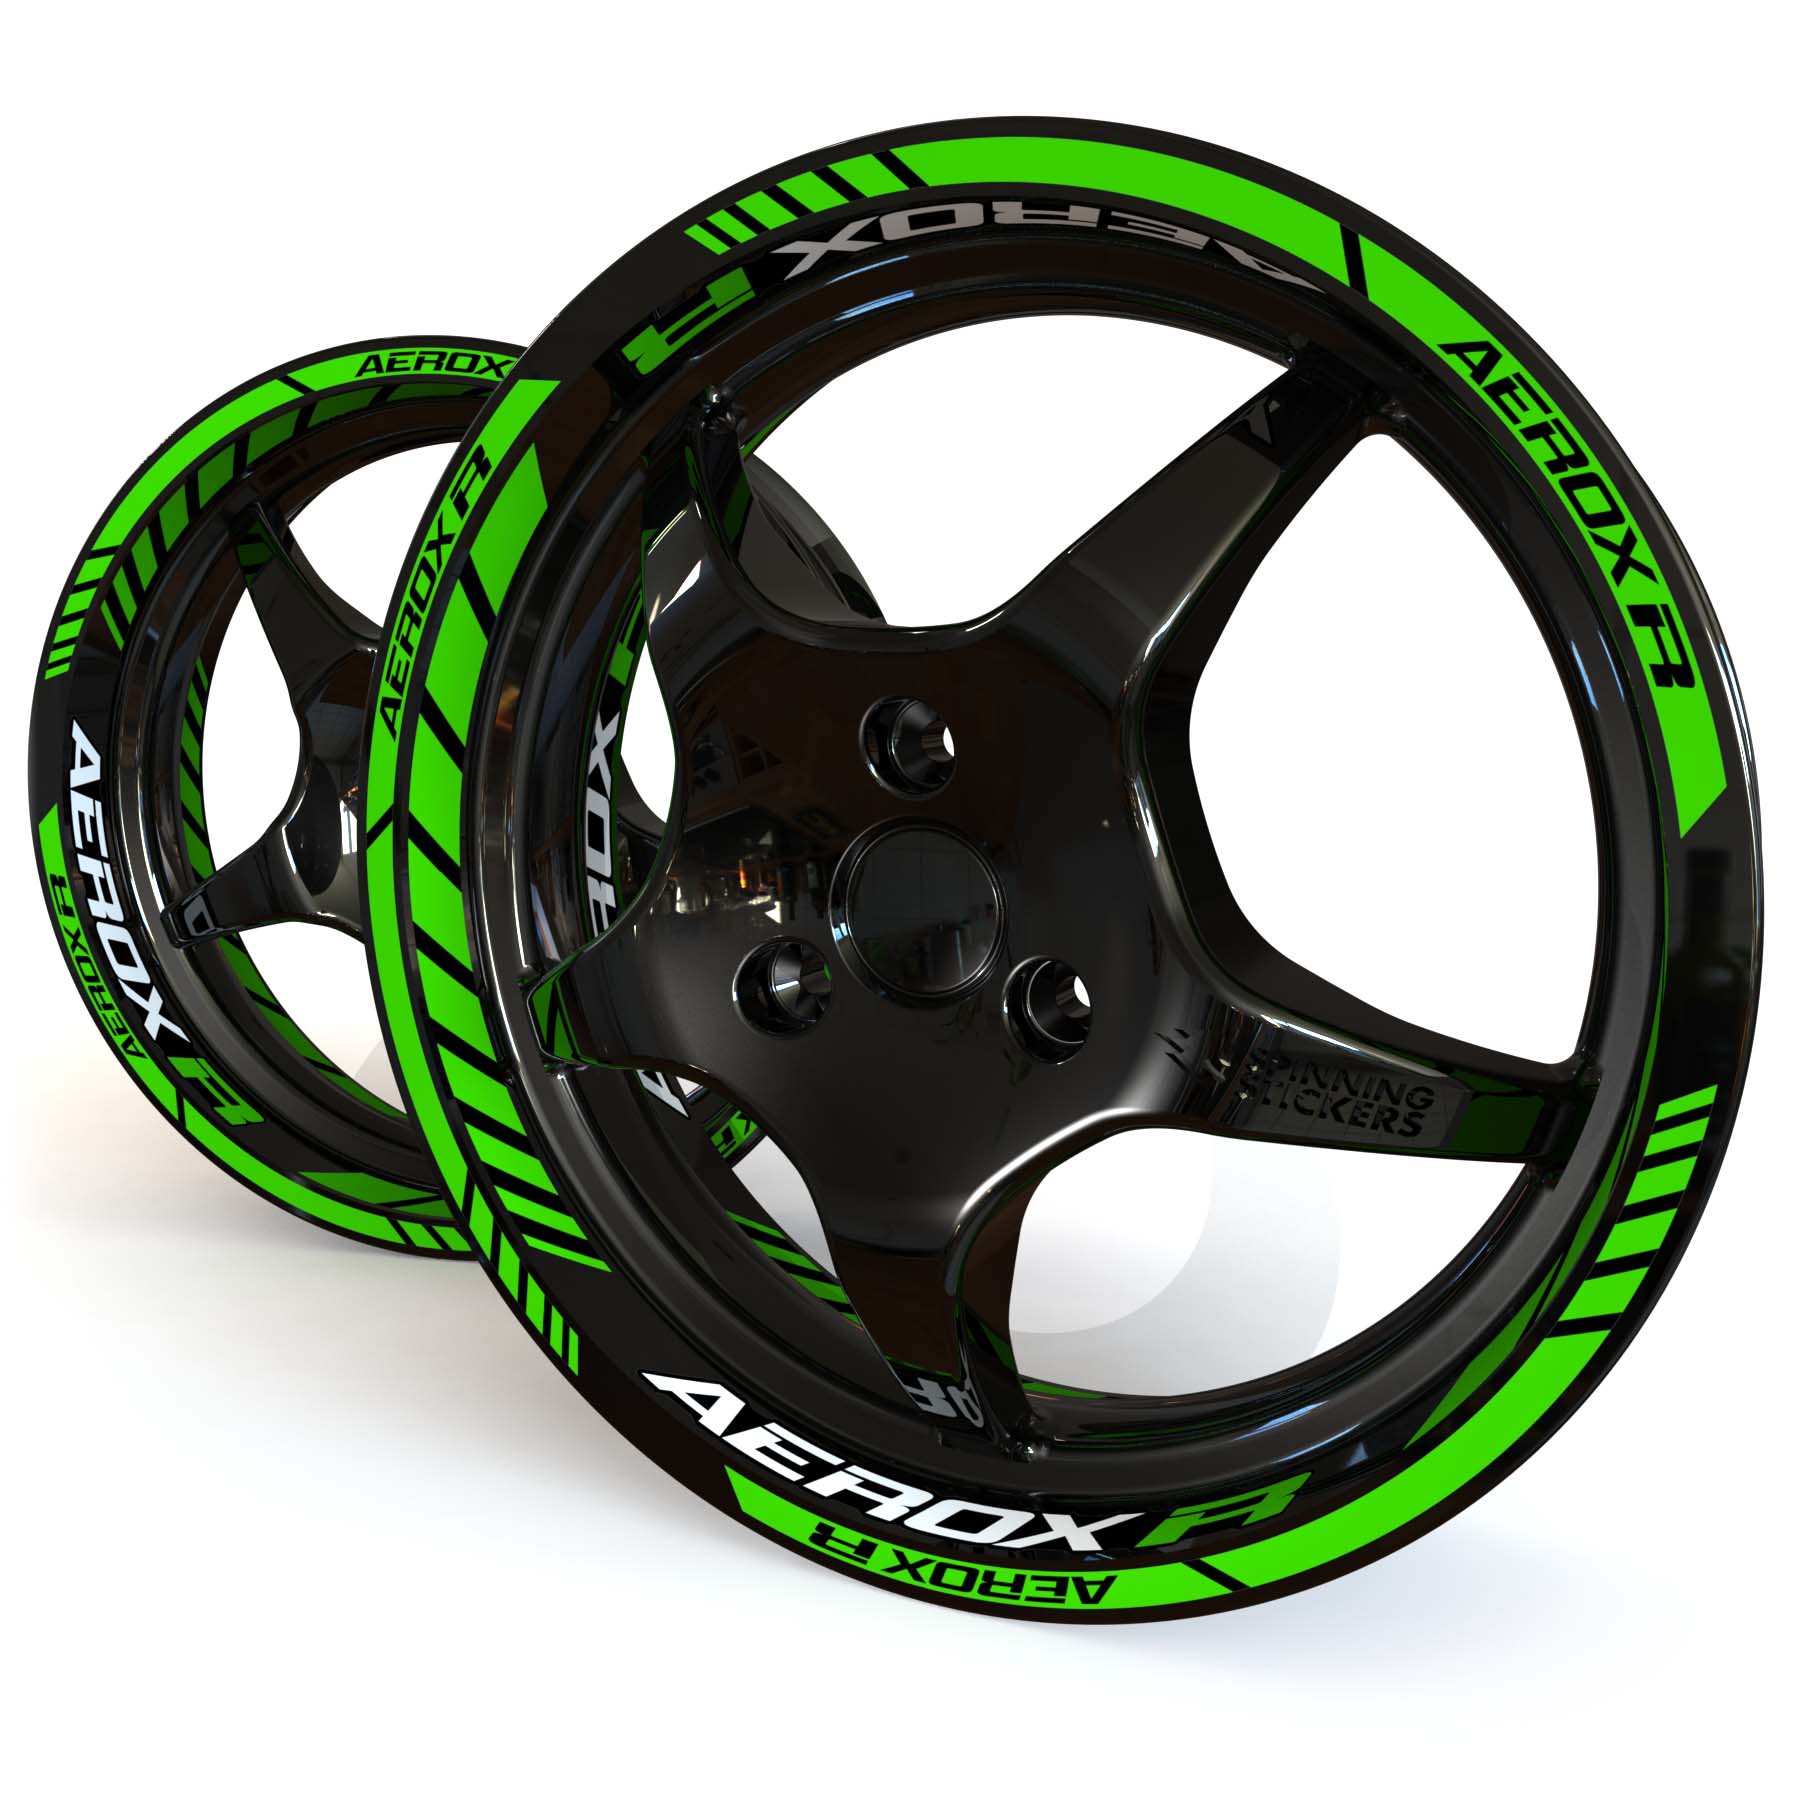 Green and white Yamaha Aerox R wheel stickers on a black 12 inch moped rim